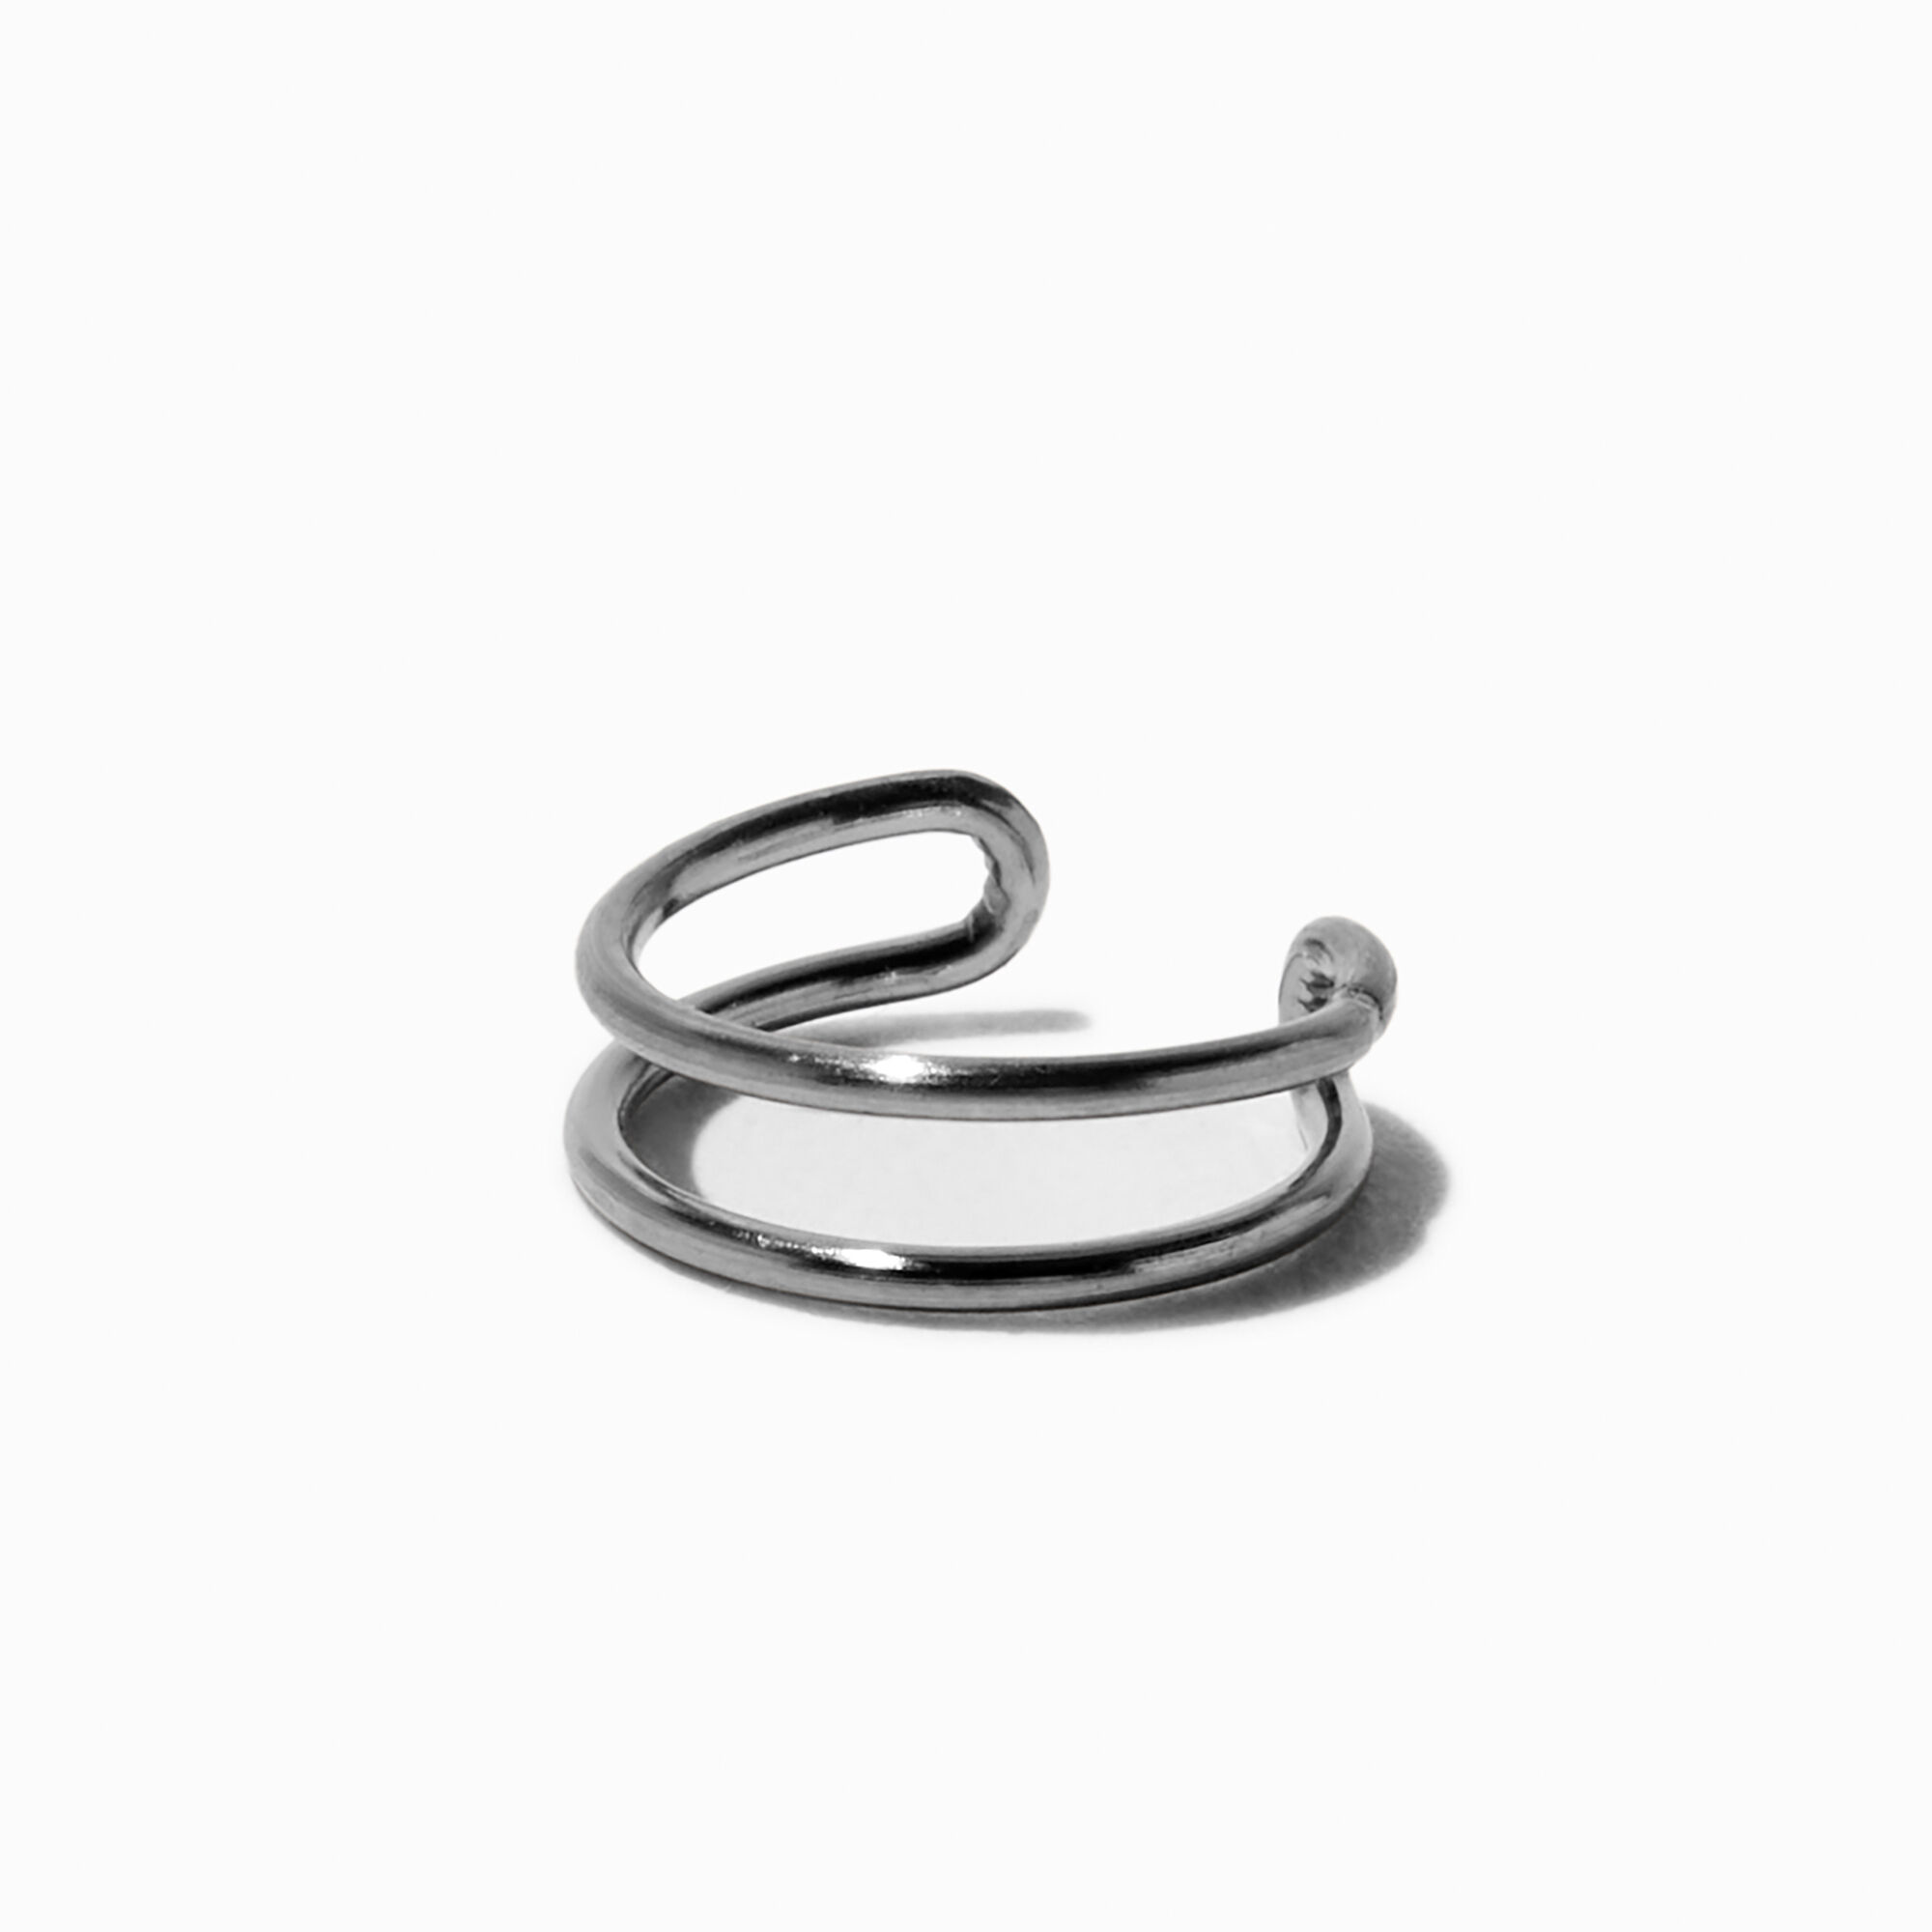 View Claires Tone Stainless Steel Double Hoop Faux Nose Ring Silver information